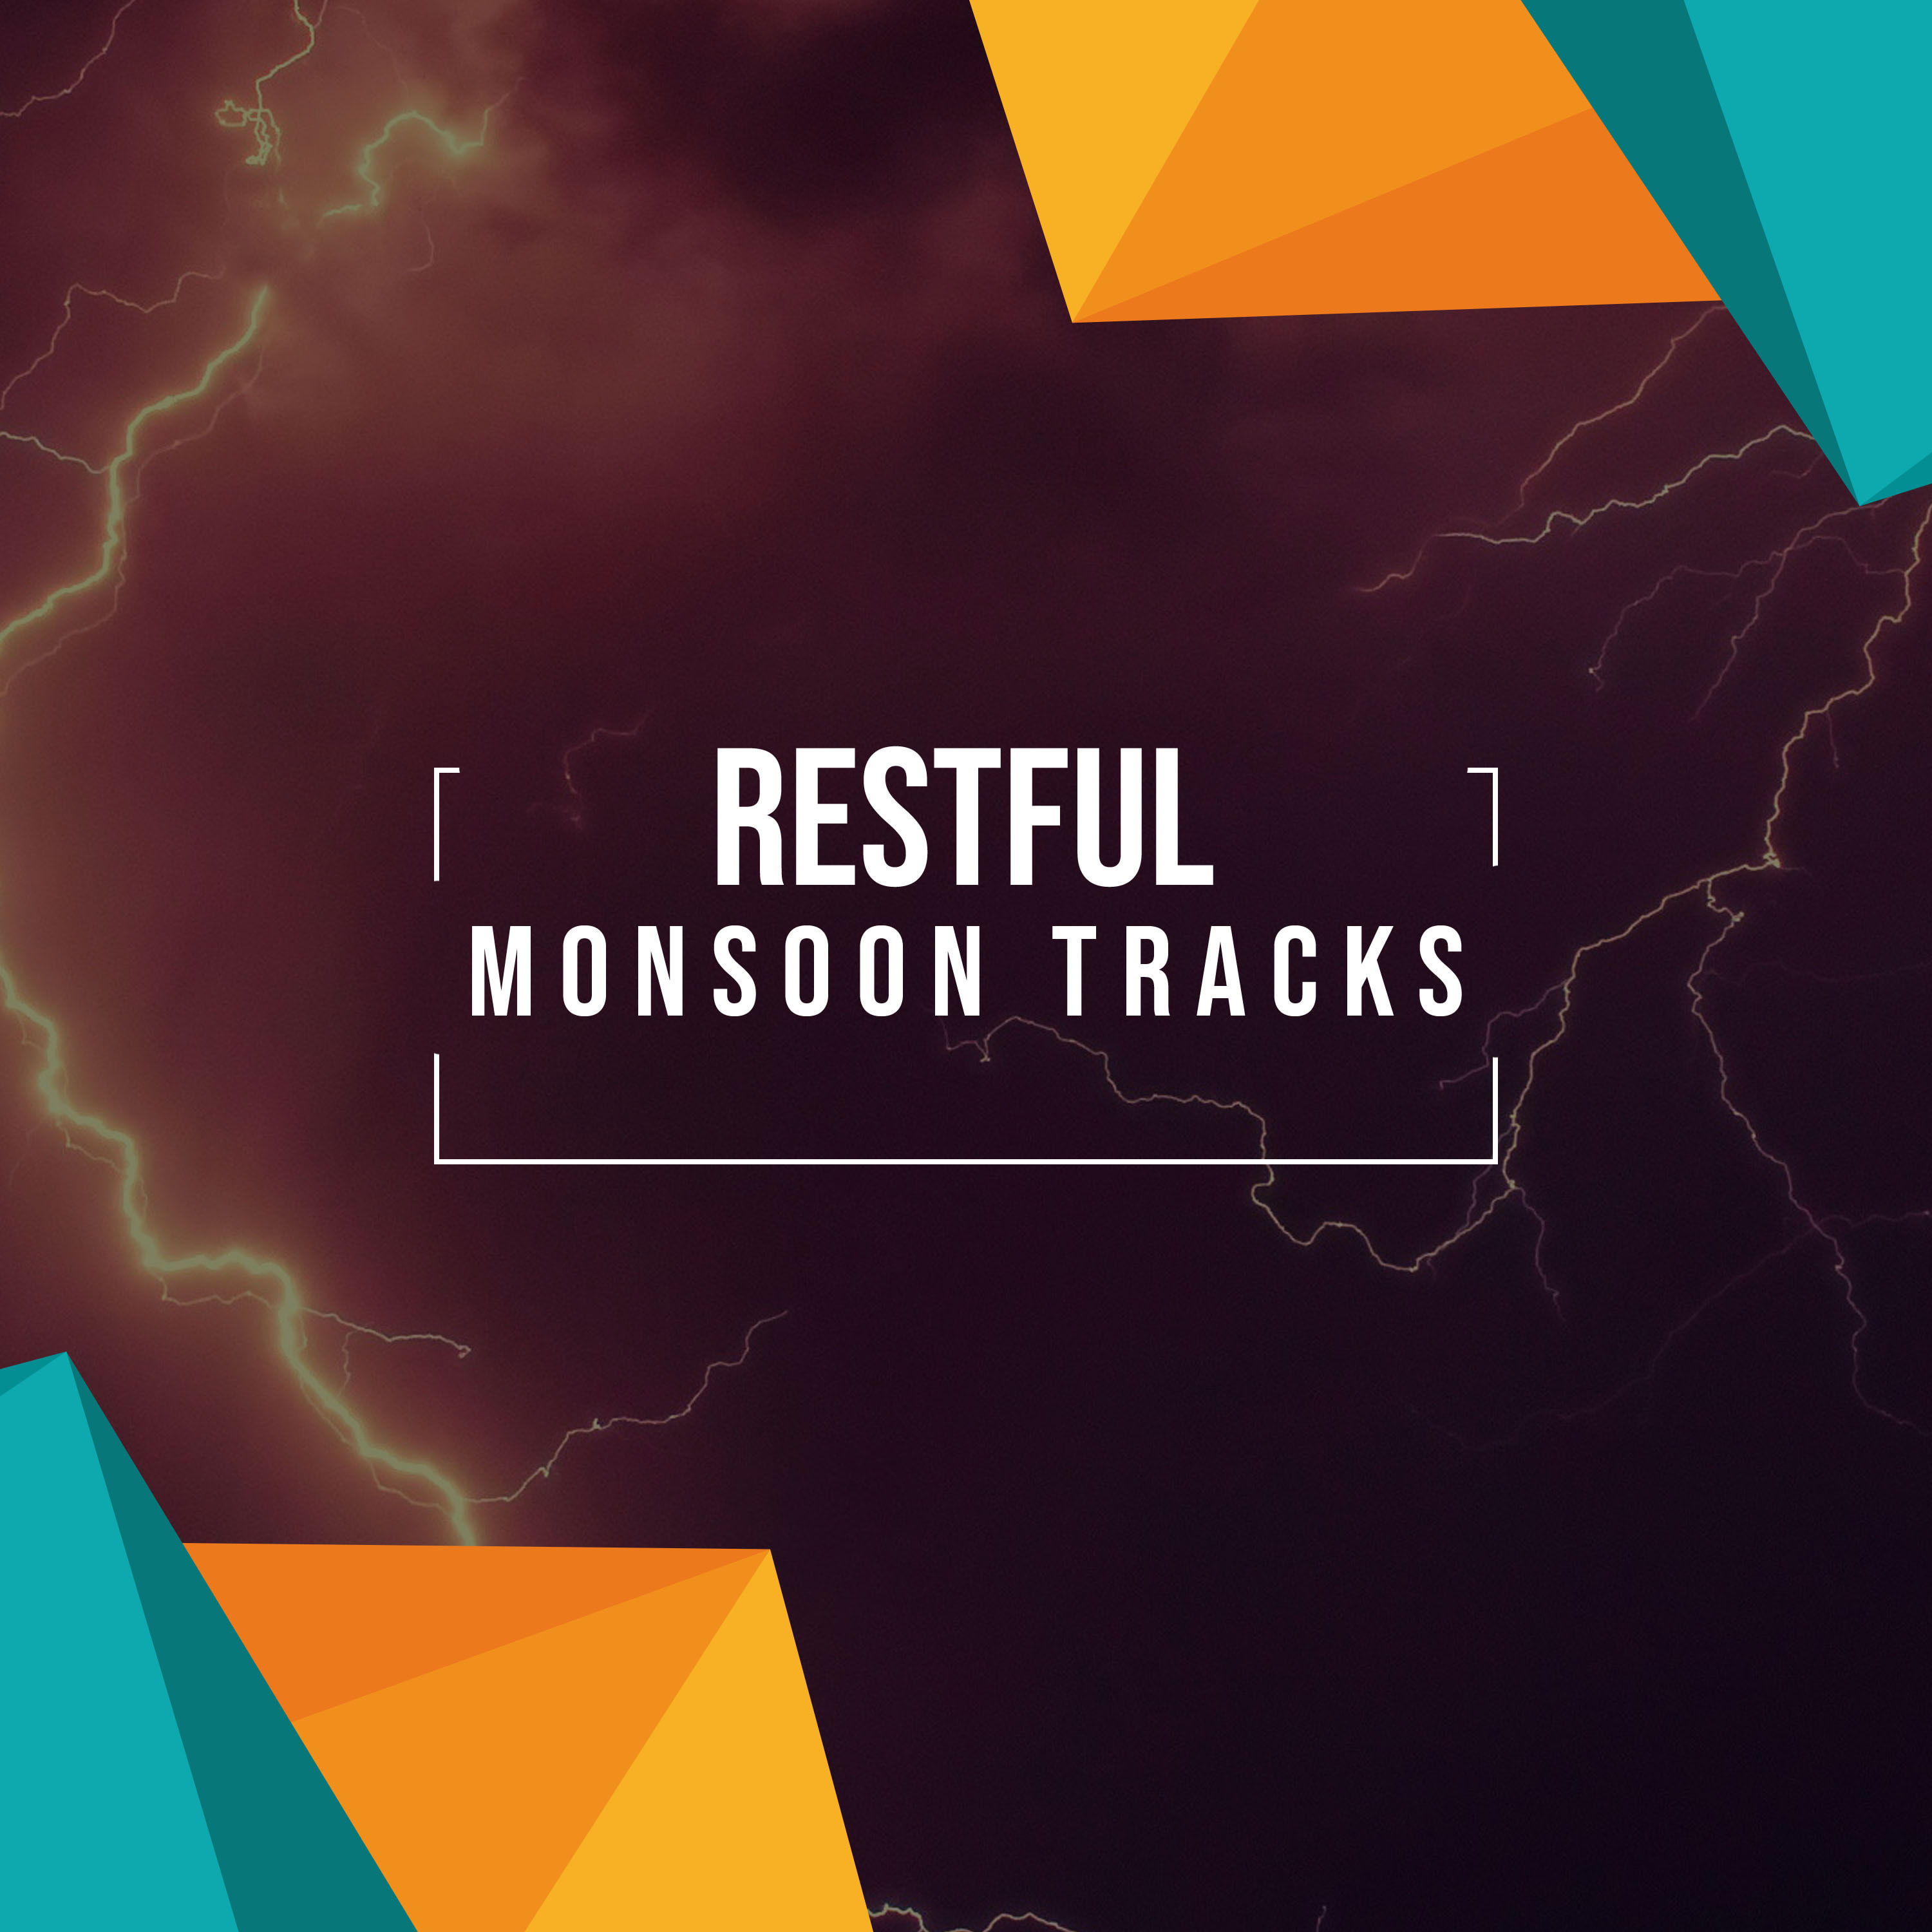 #12 Restful Monsoon Tracks for Relaxation and Ambience